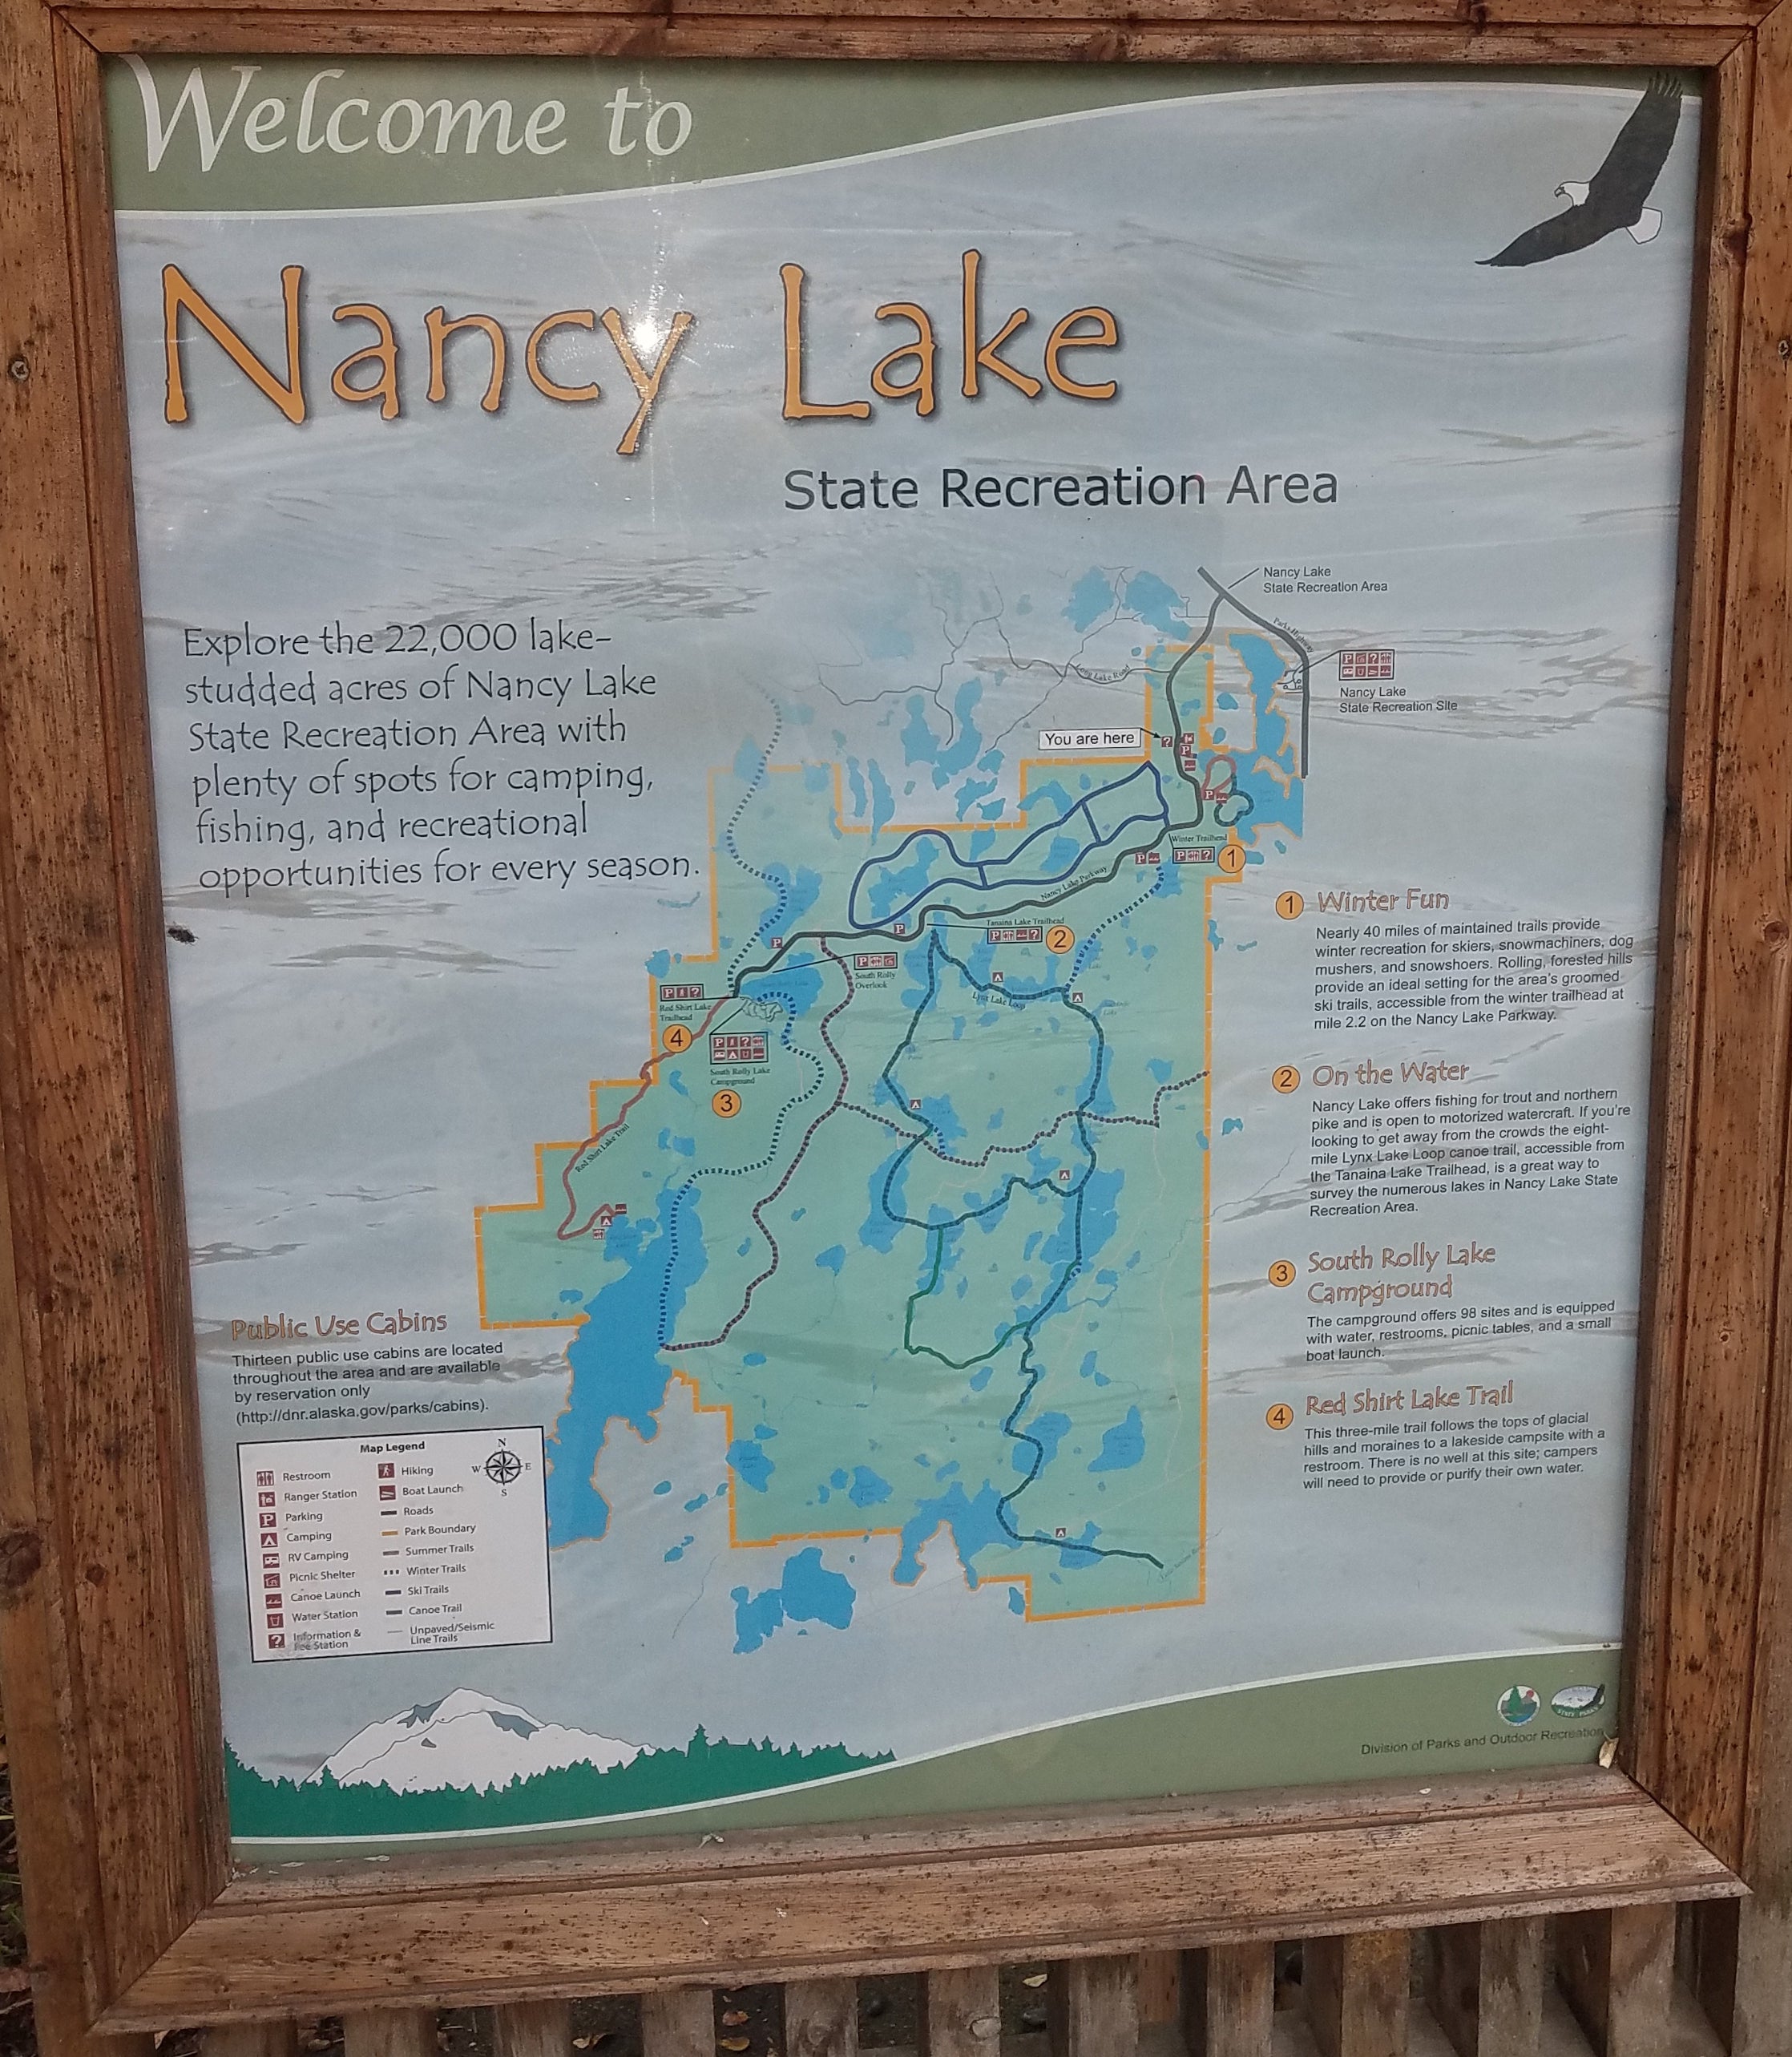 Camper submitted image from Nancy Lake State Recreation Site - 4